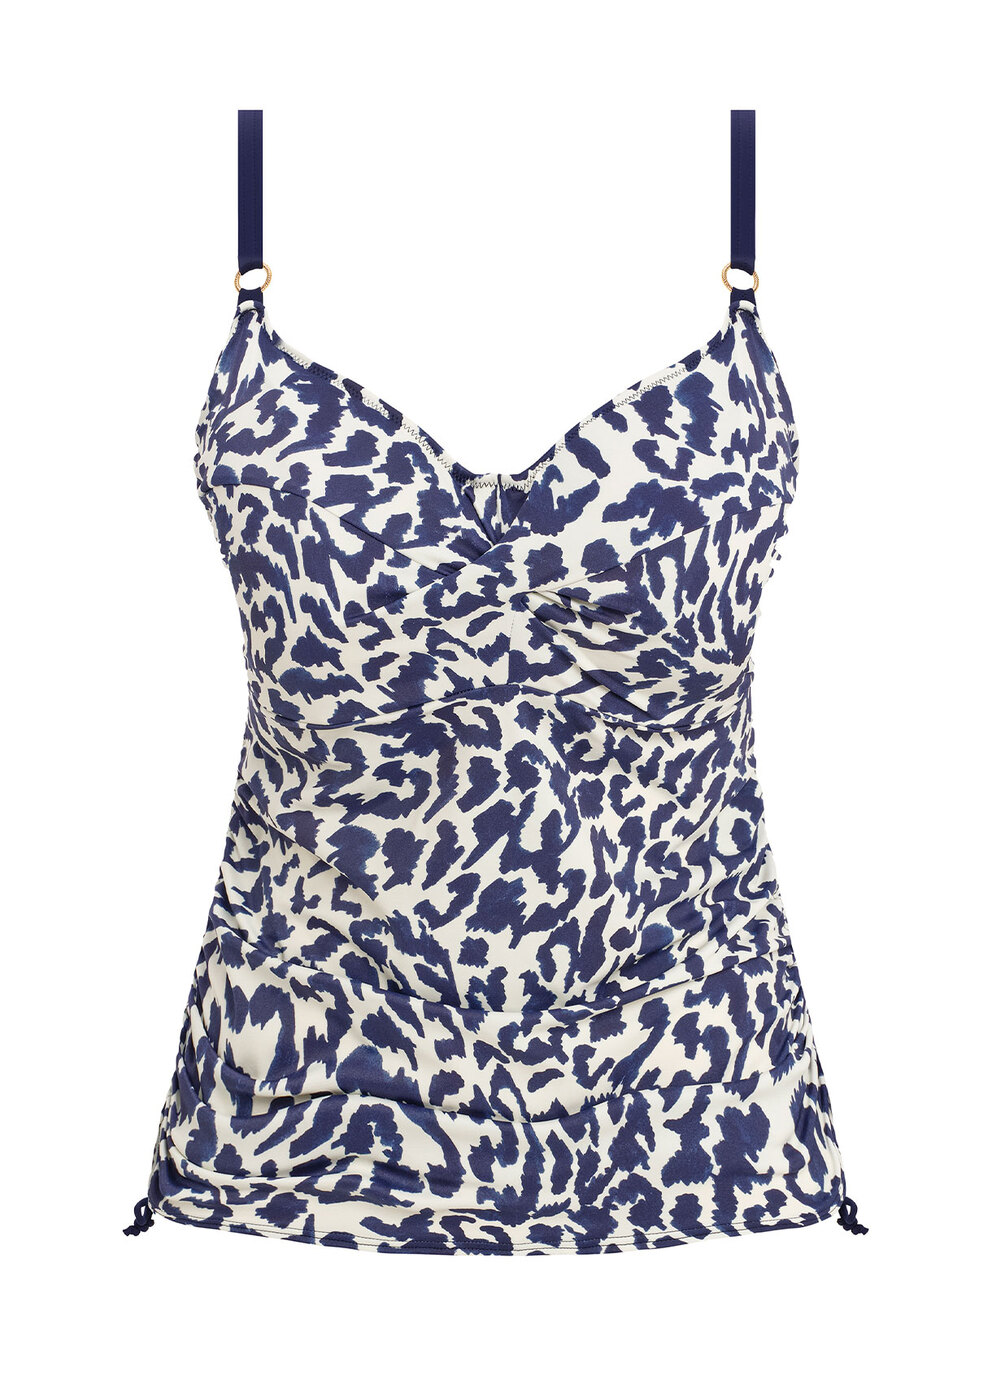 Hope Bay French Navy Twist Front Tankini Top from Fantasie